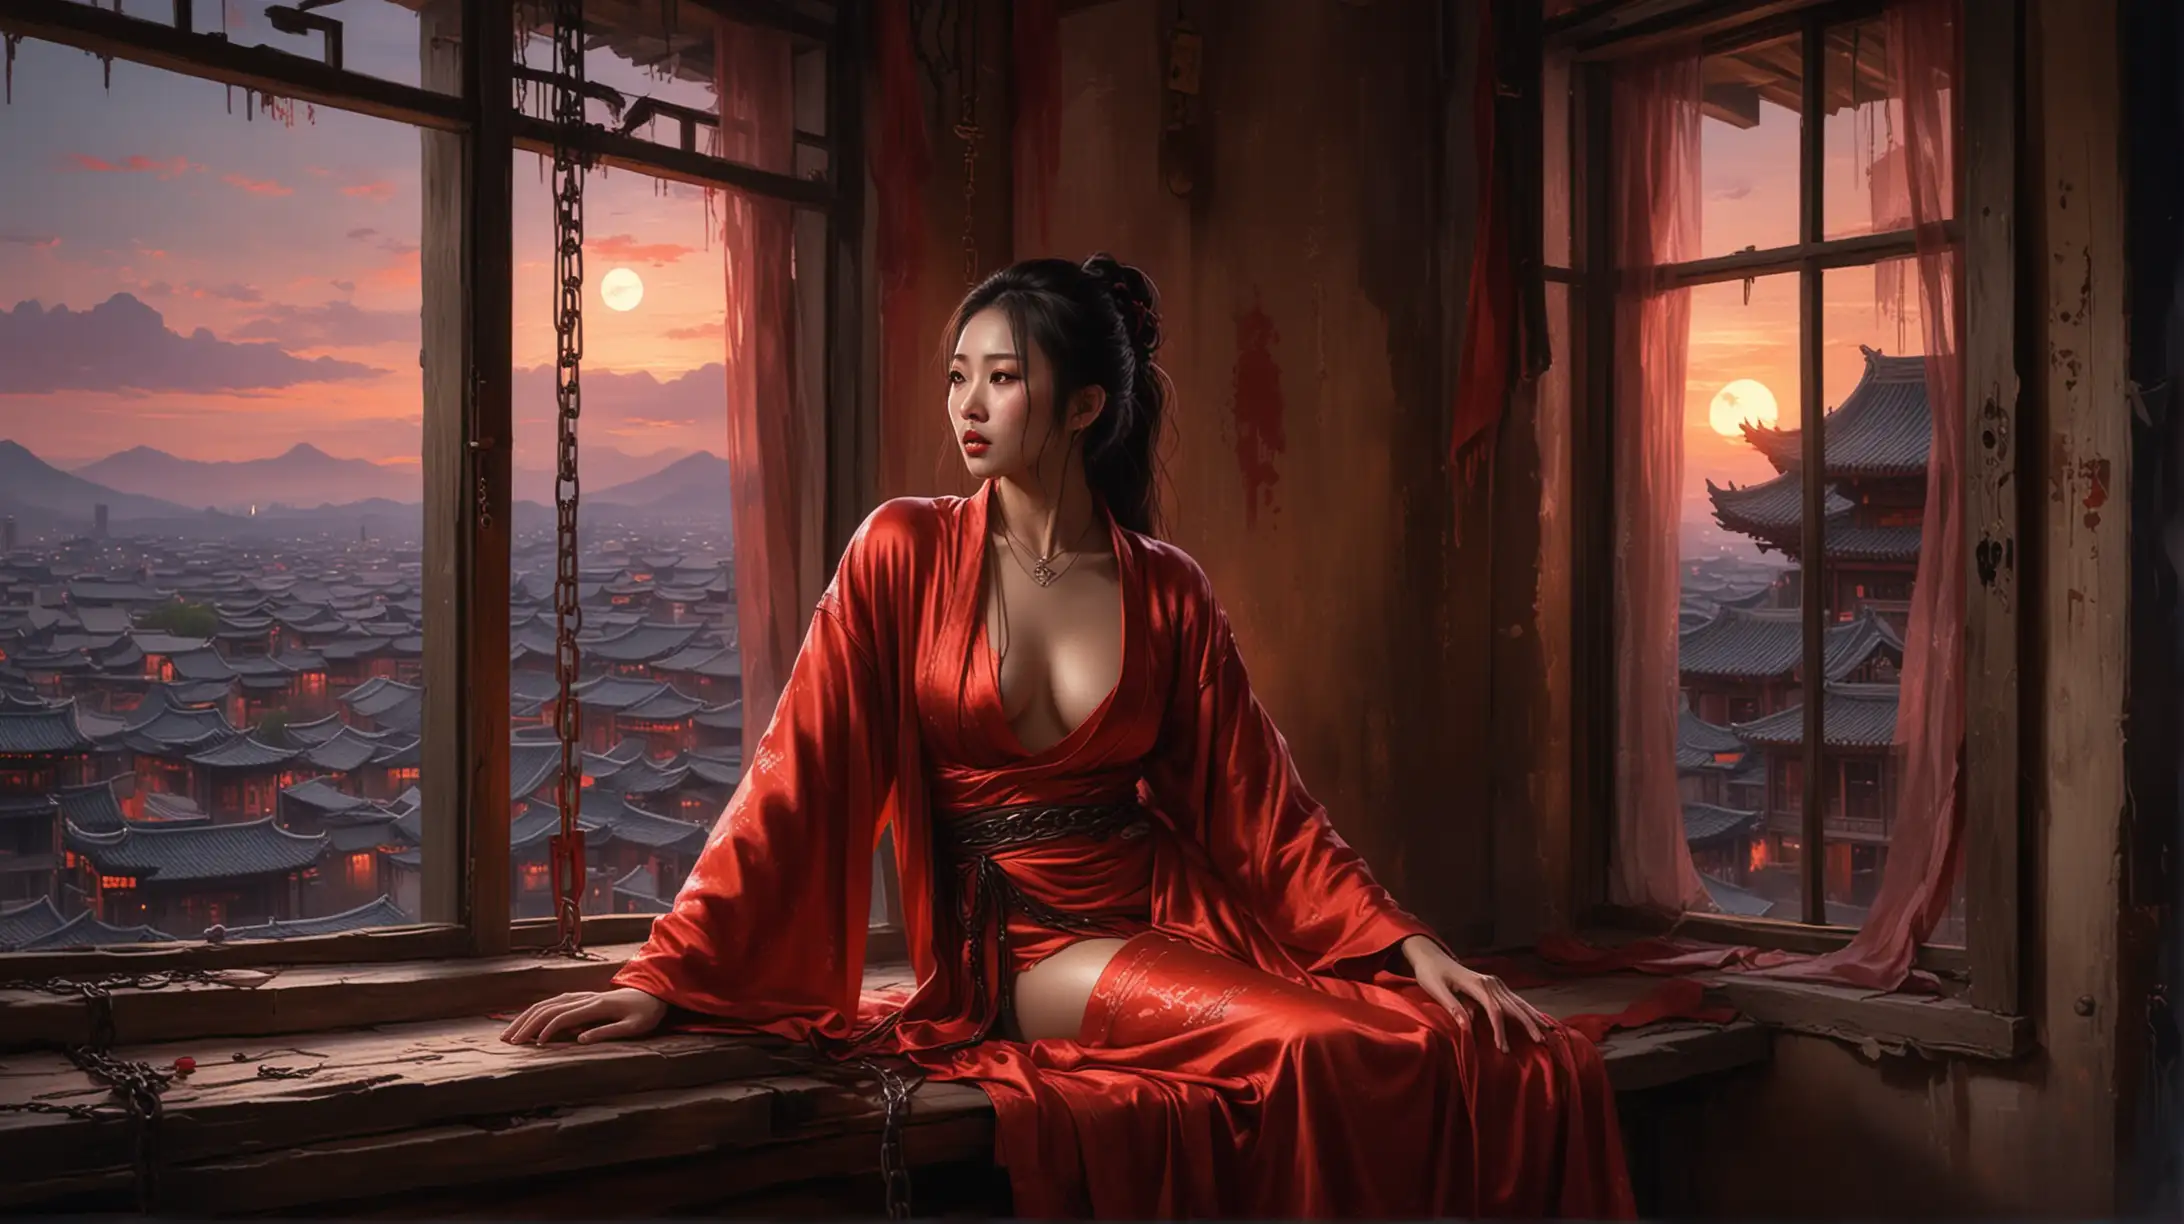 Enchanting Chinese Female Vampire in Silk Robe Chained Prisoner in Attic Room with Red Moonlight View